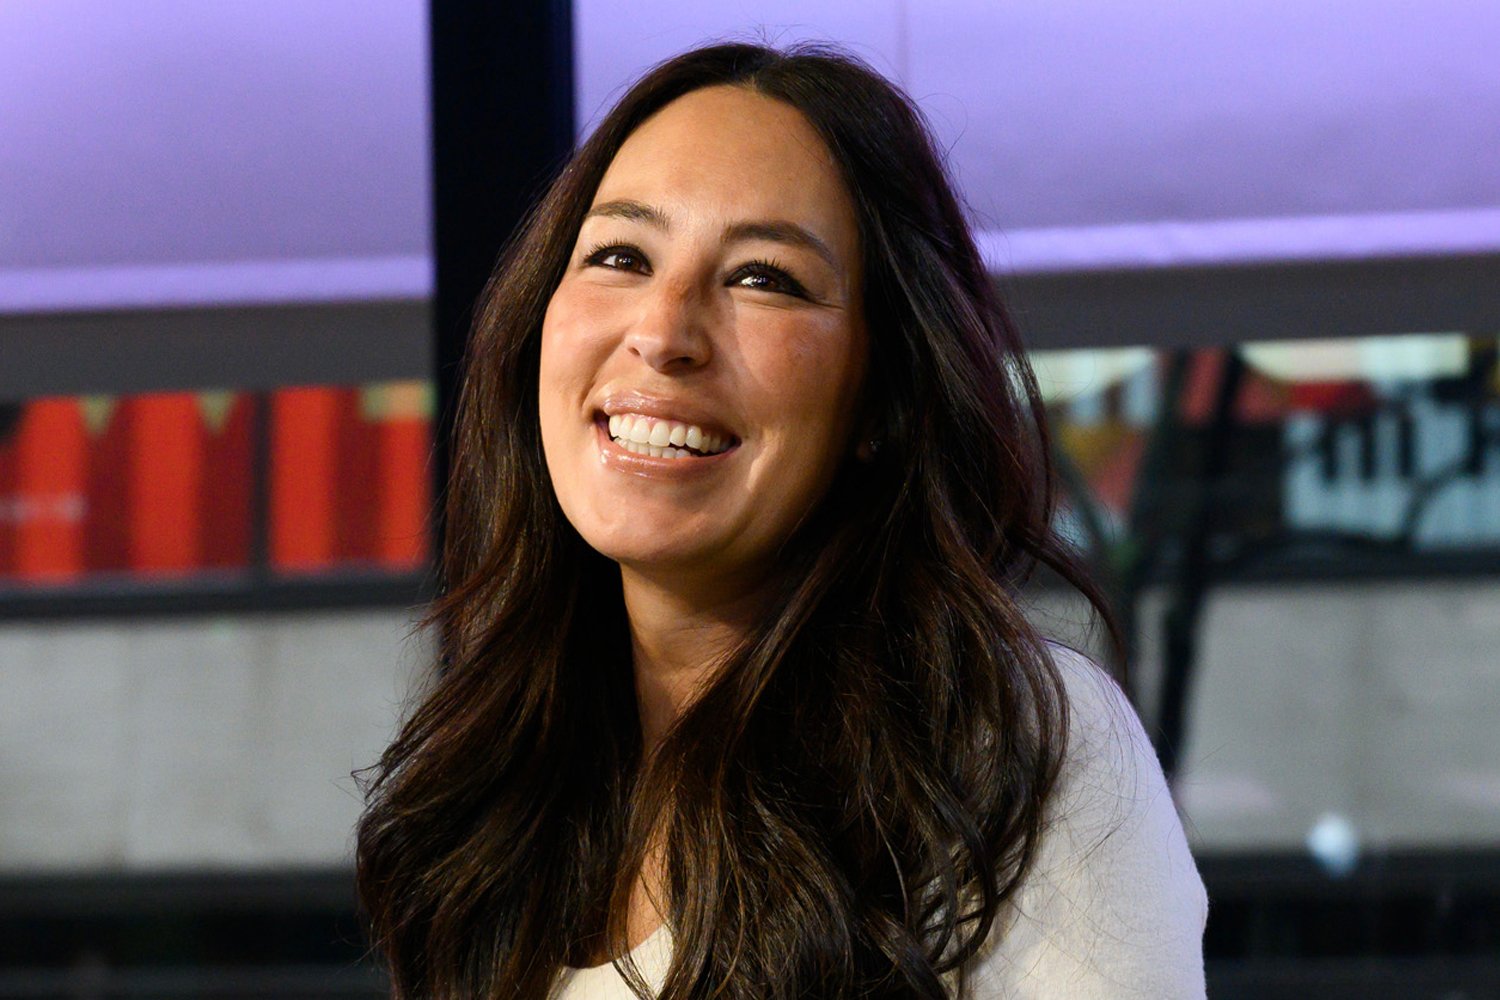 Joanna Gaines Shares a Video Making Candy but Fans Can't Stop Talking ...